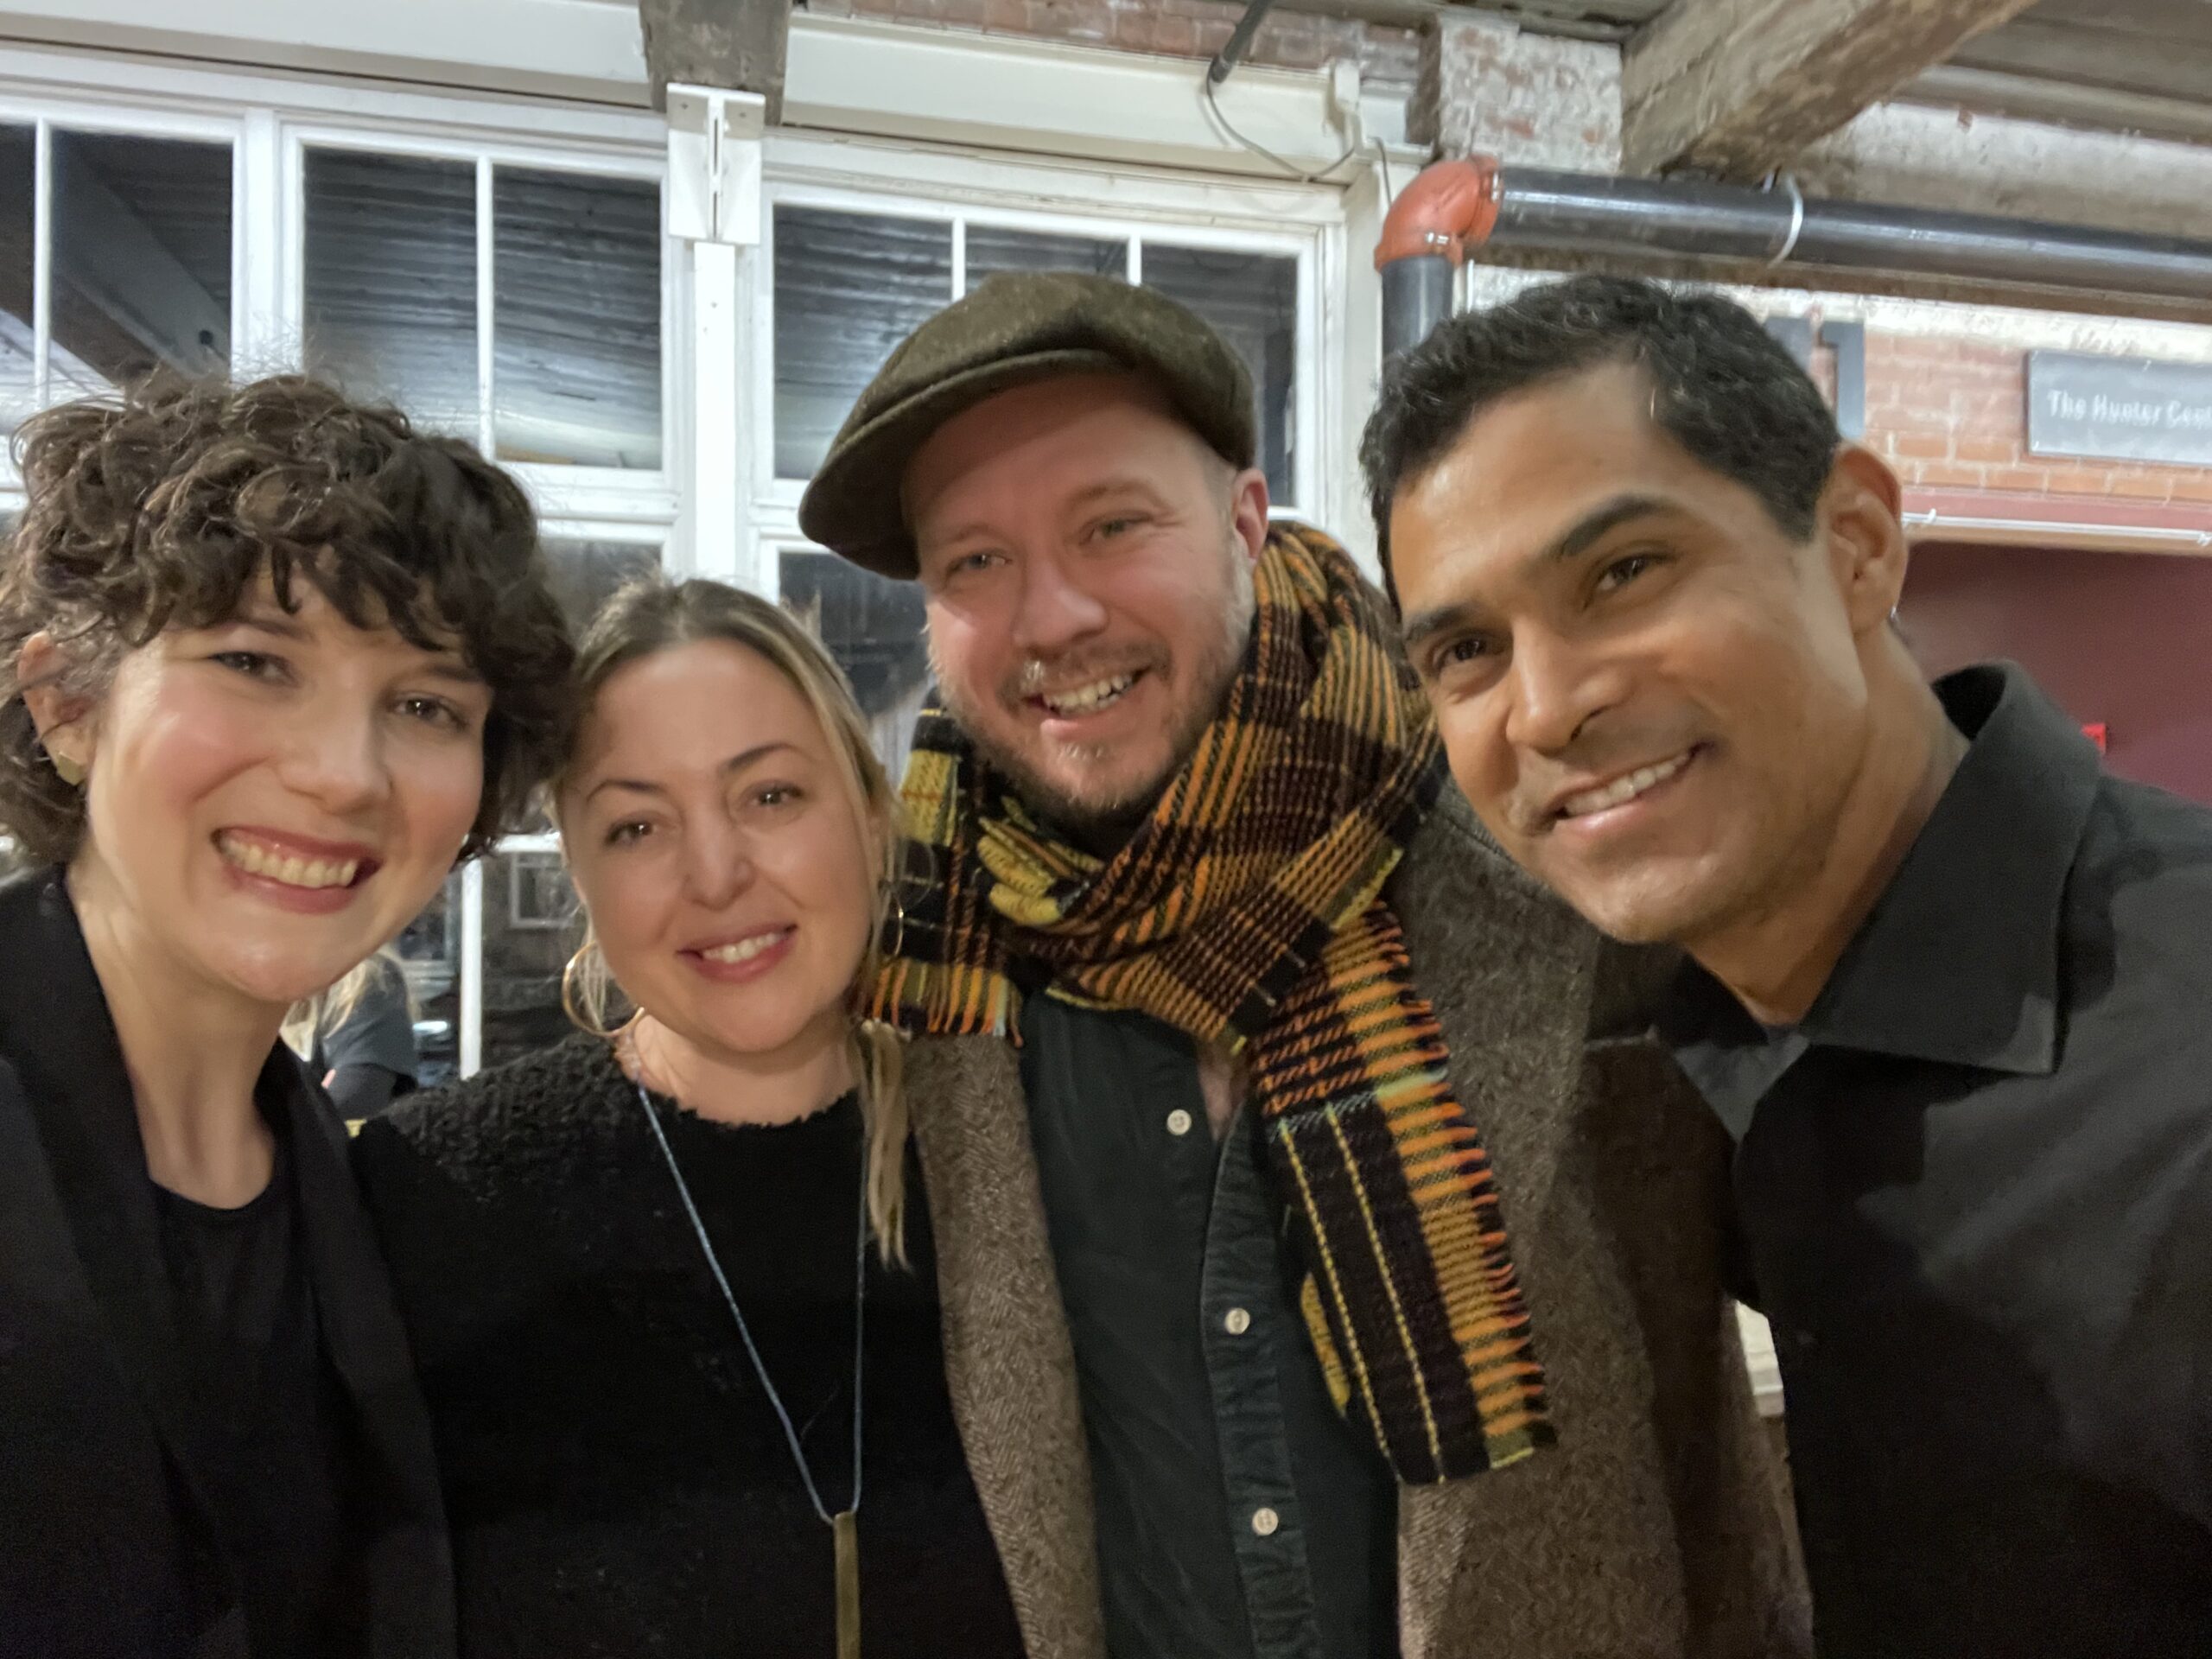 The Old Man and the Sea at MASS MoCA, post-show with composer Paola Prestini, librettist Royce Vavrek, and cellist Jeffrey Zeigler